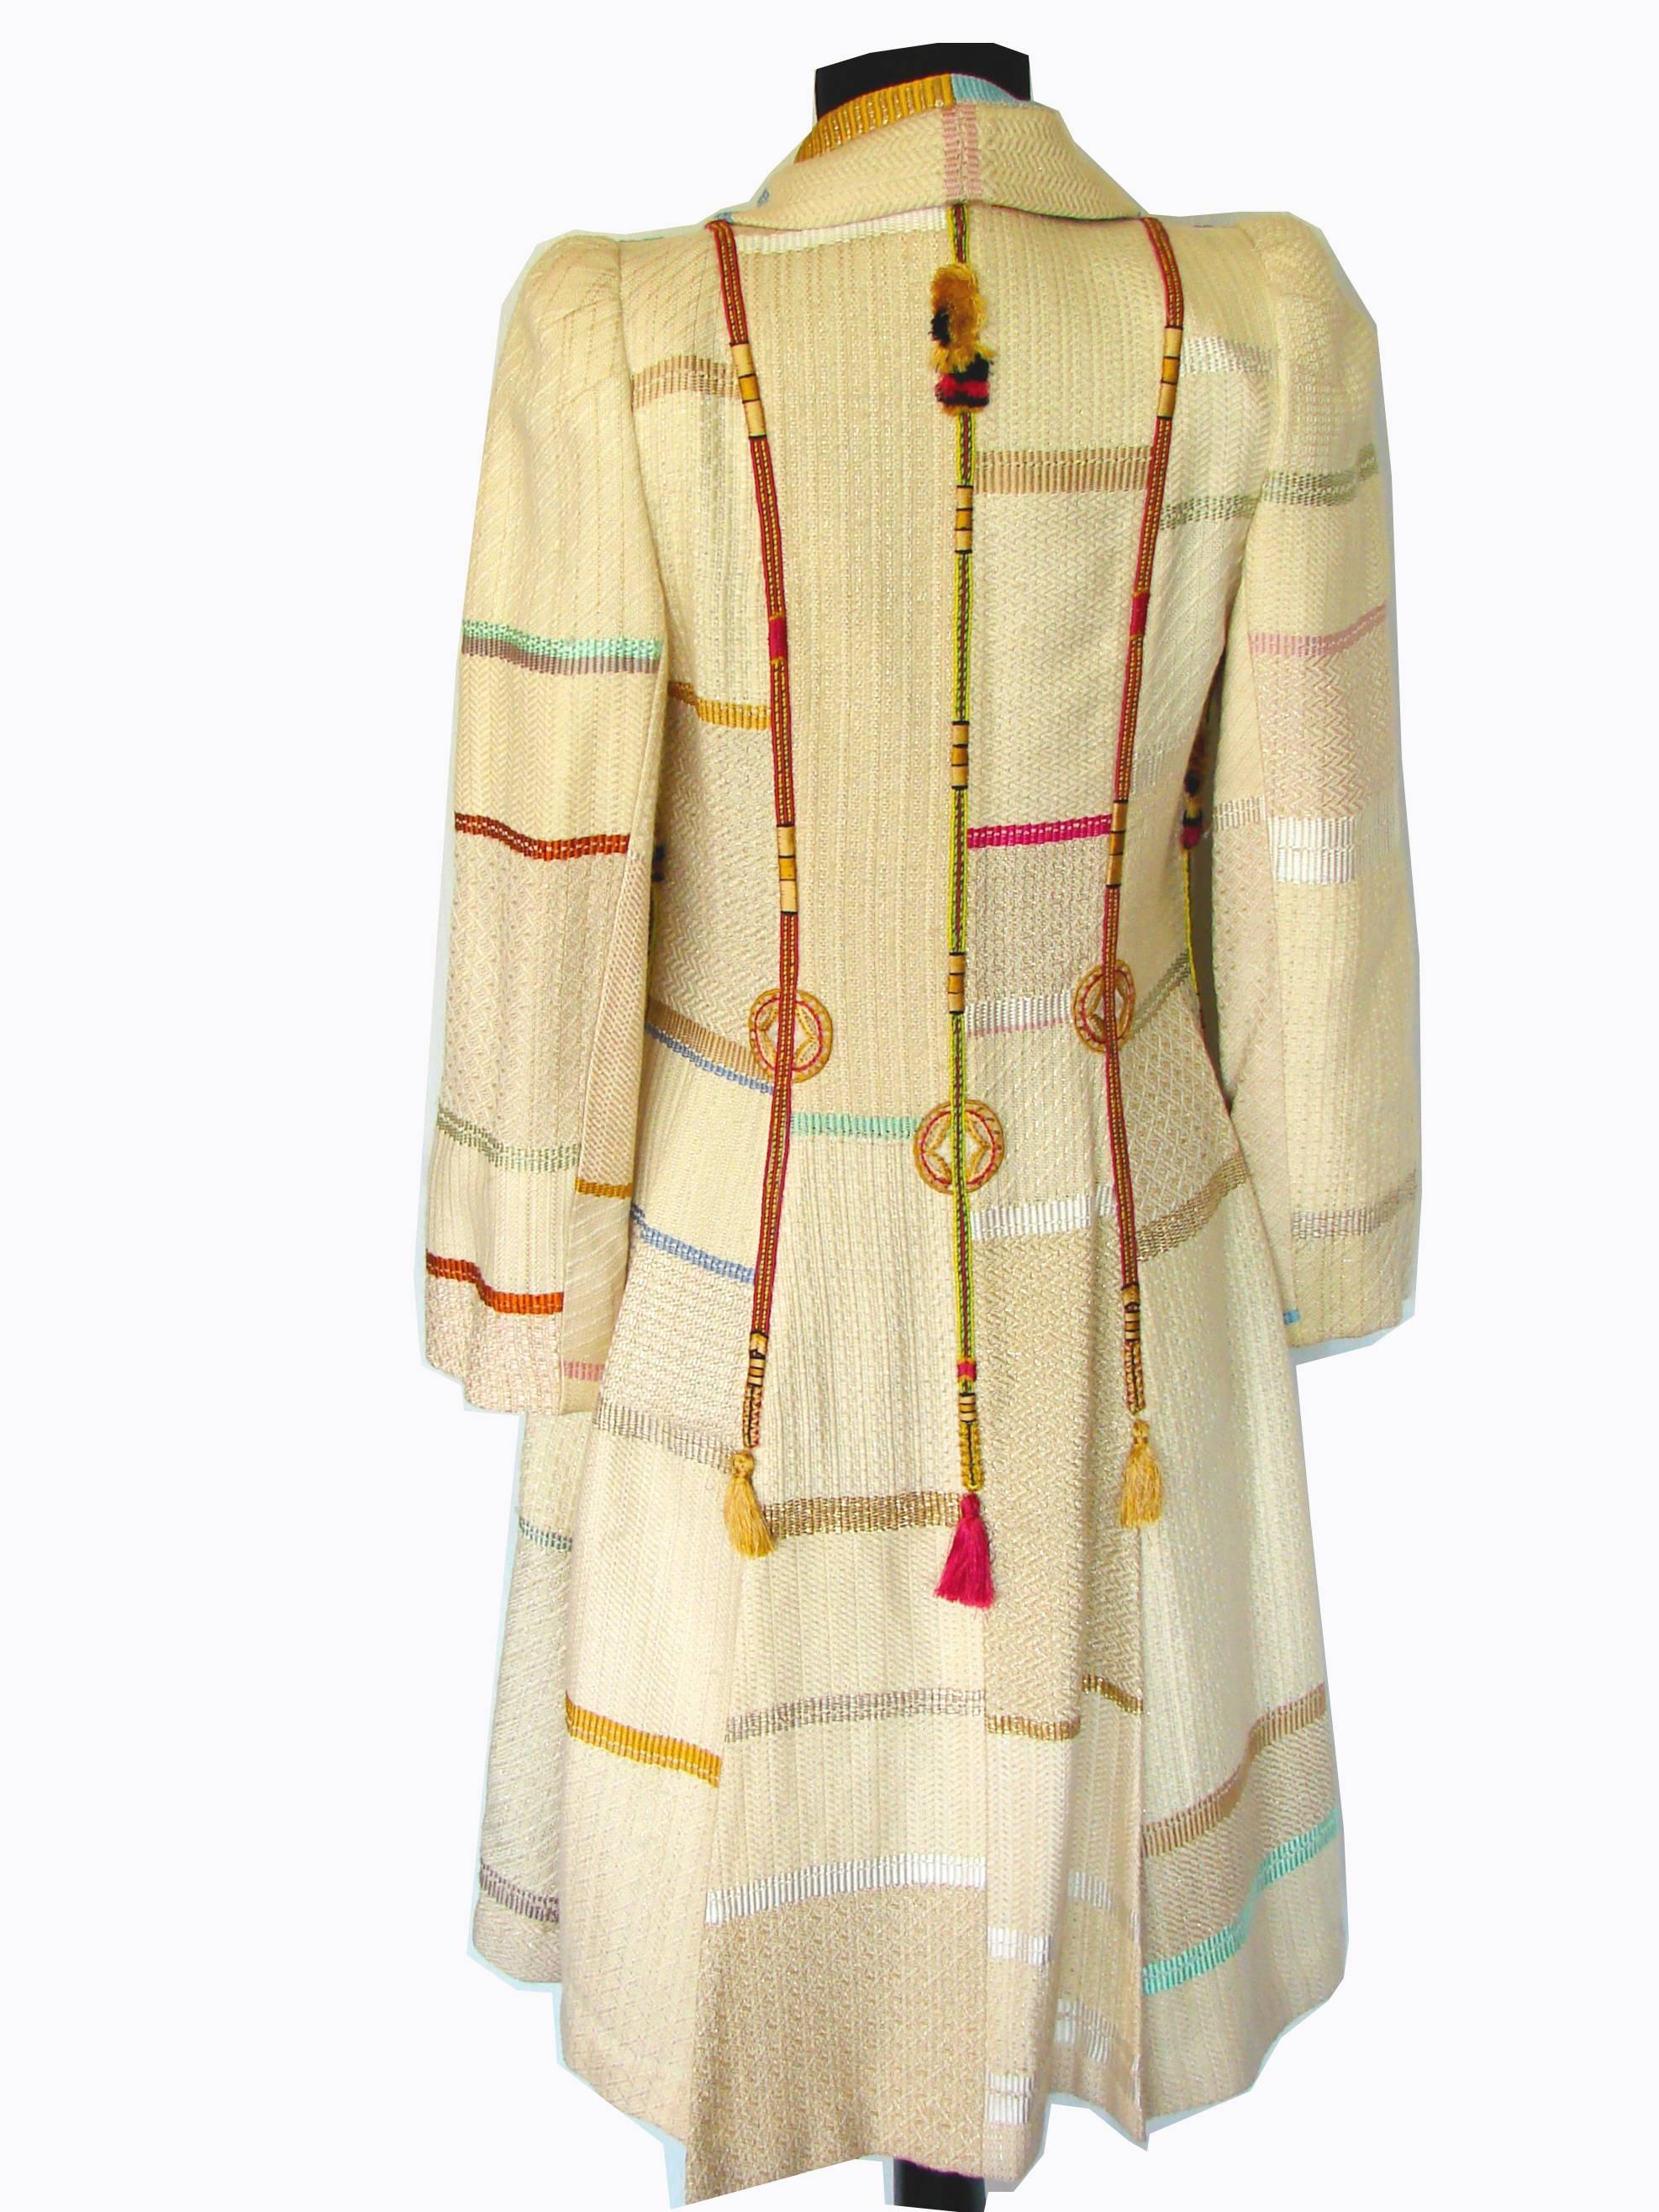 Rare Christian Lacroix Haute Couture Silk Worsted Tassel Coat with Embroidery S 1